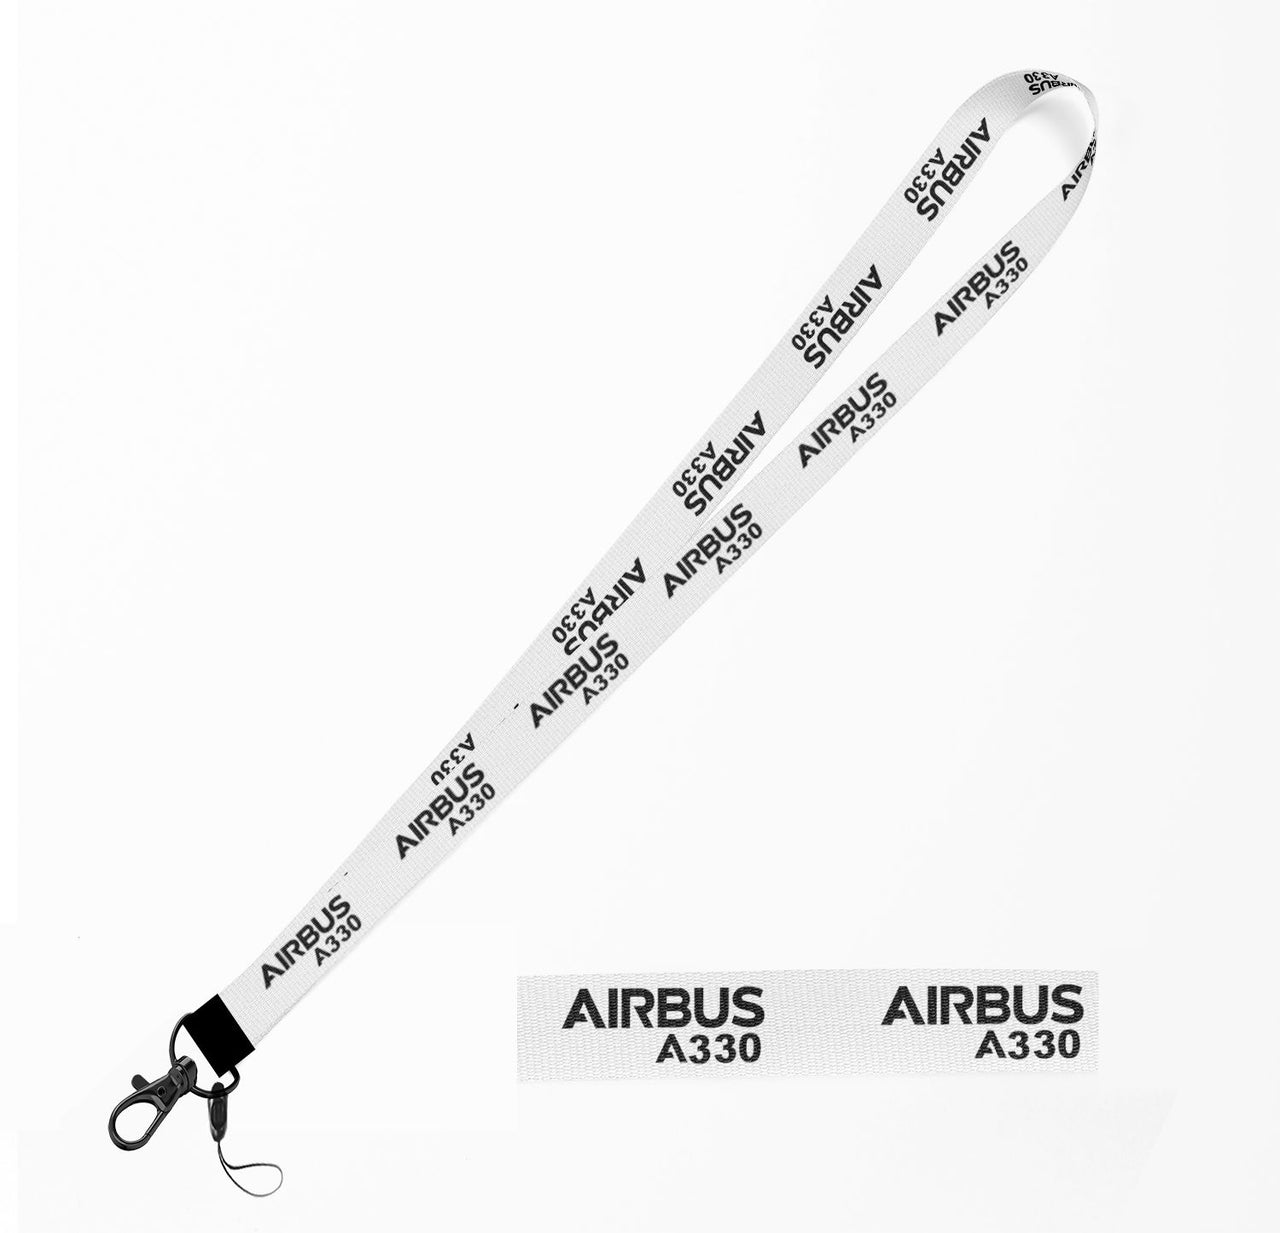 Airbus A330 & Text Designed Lanyard & ID Holders